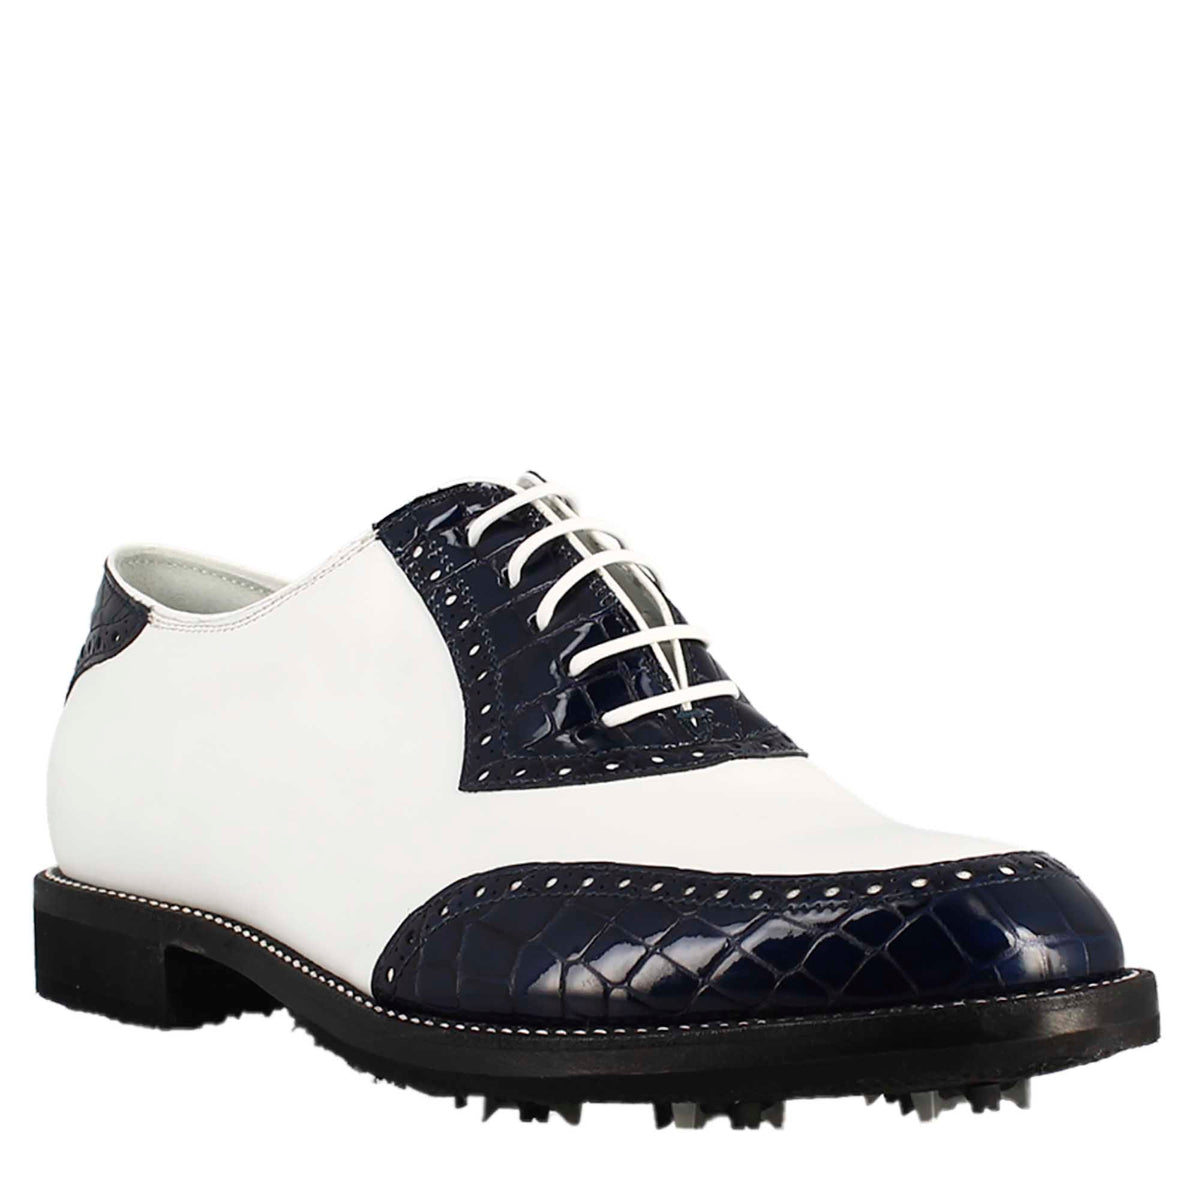 Handcrafted women's golf shoes in white leather and blue coconut